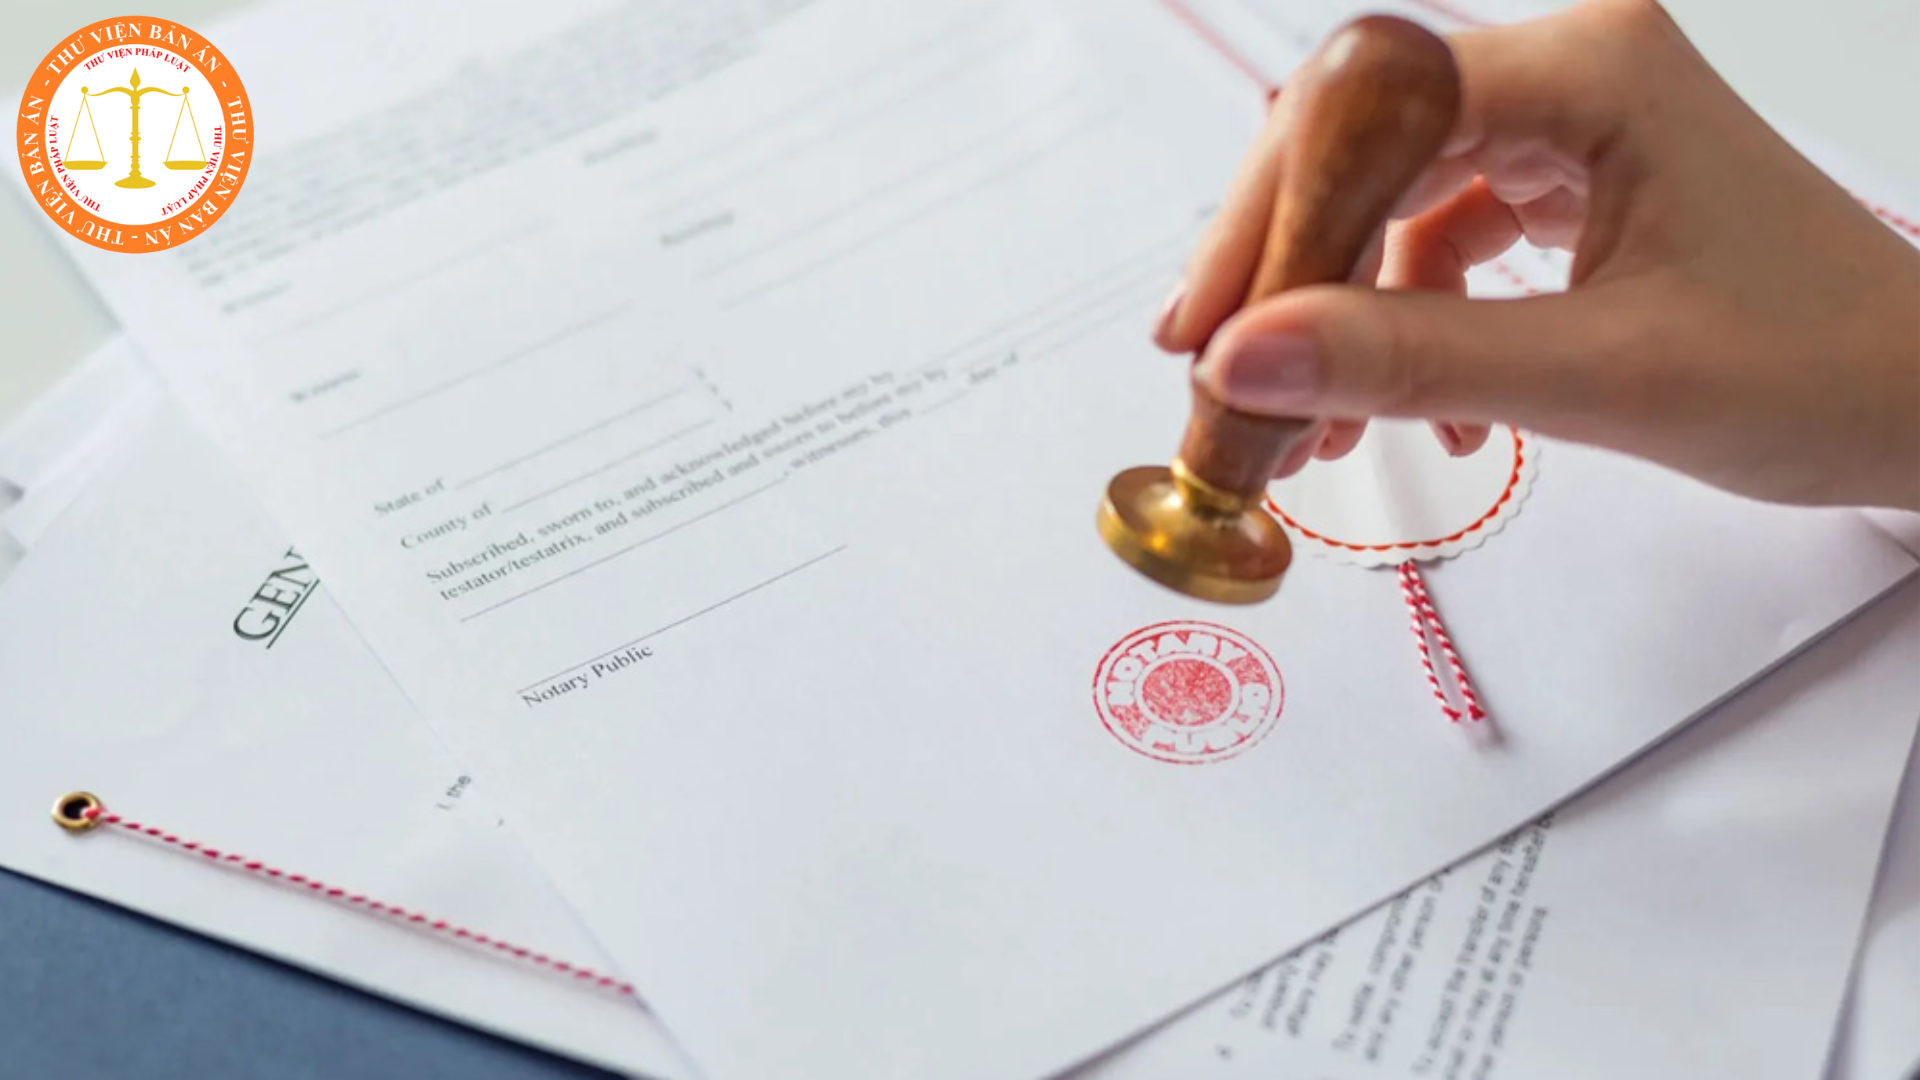 When will the notarized be declared invalid in Vietnam? Some related judgements